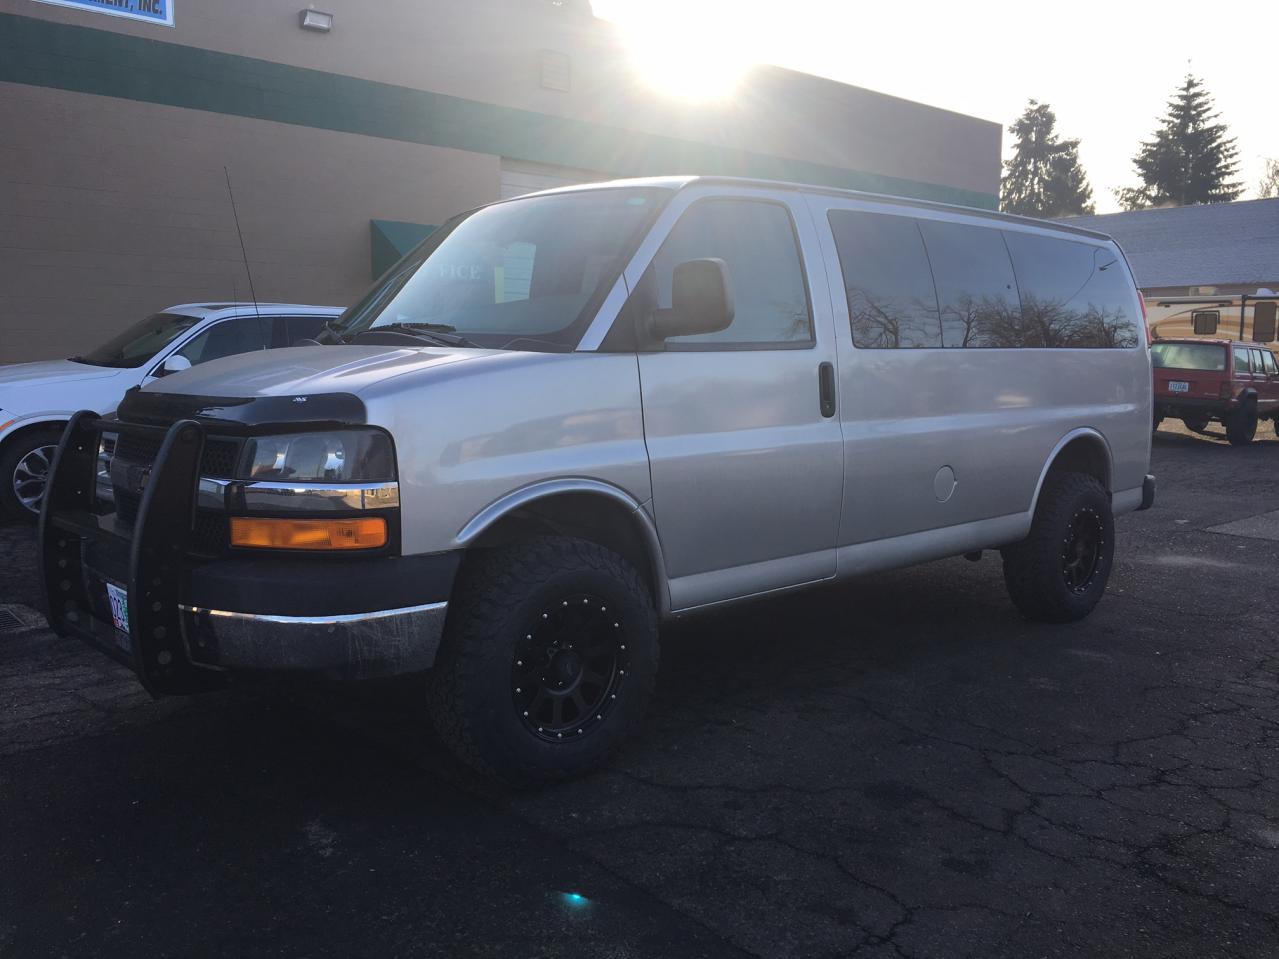 Van 3 - Hugh after a 2" Lift Kit from Boulder Offroad and some BFG T/A K02 (265 70 17's). Installing running boards this weekend. More photos to come.